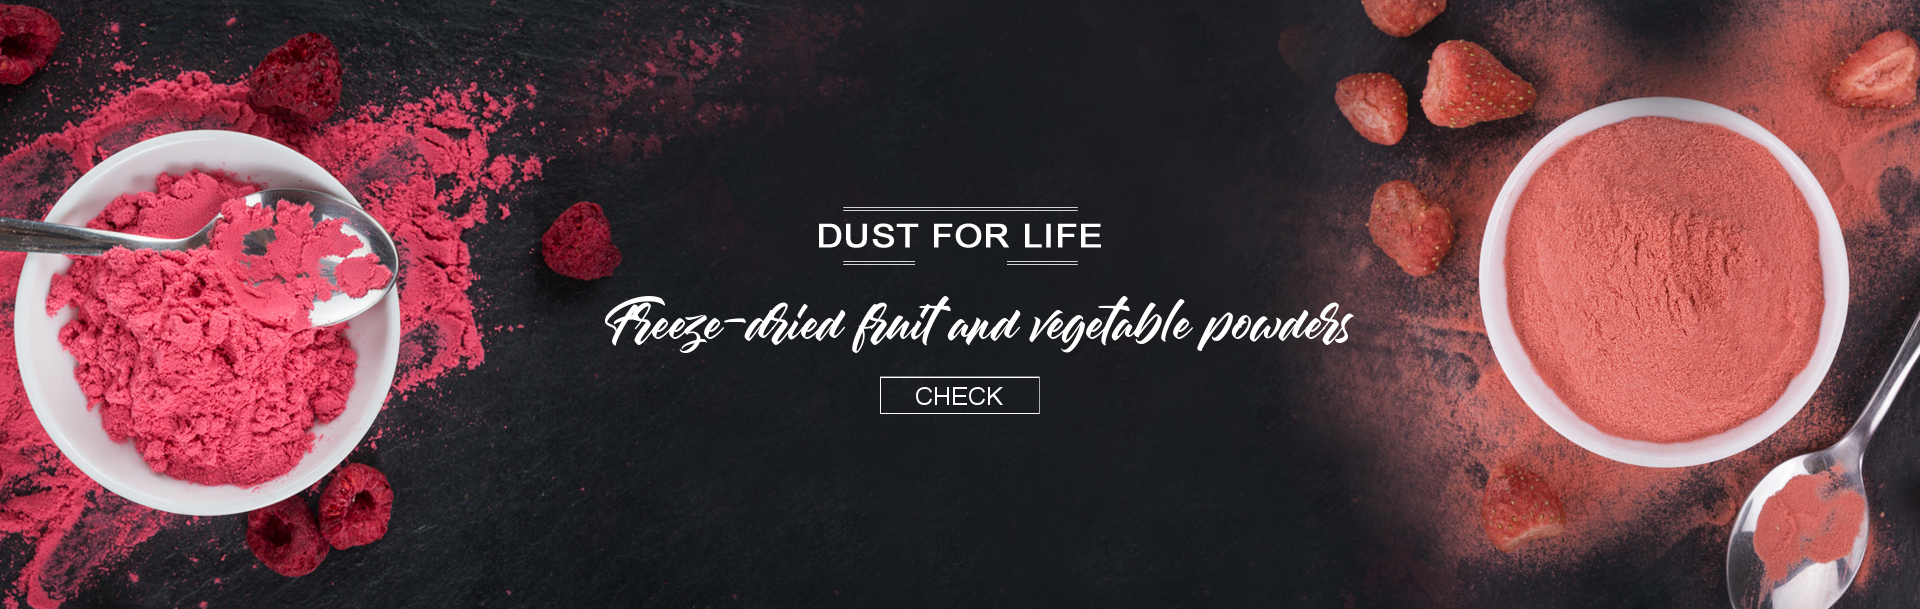 1_dust_for_life